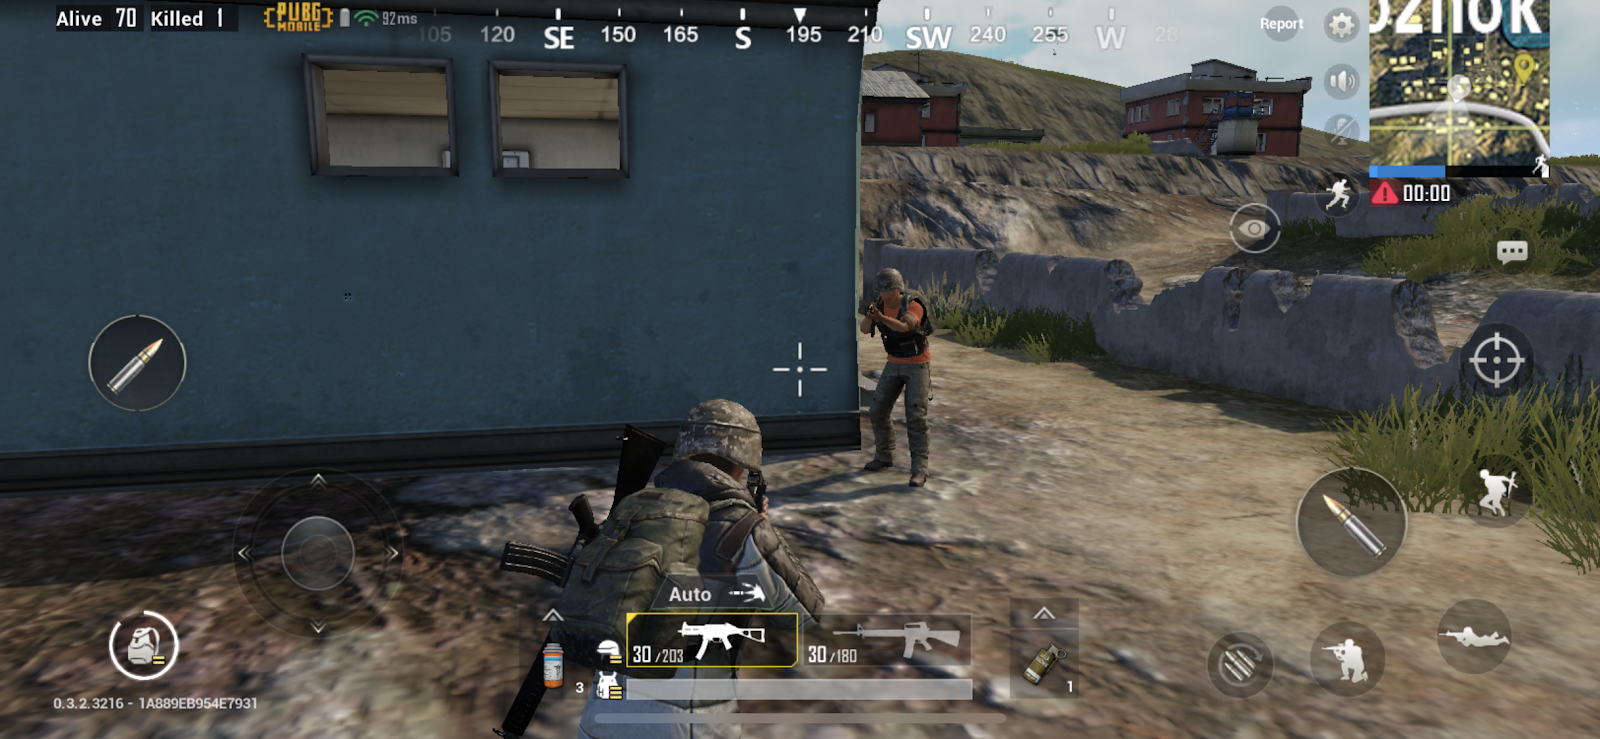 PUBG Mobile Players Are Pretty Sure The Game Is Full Of Bots